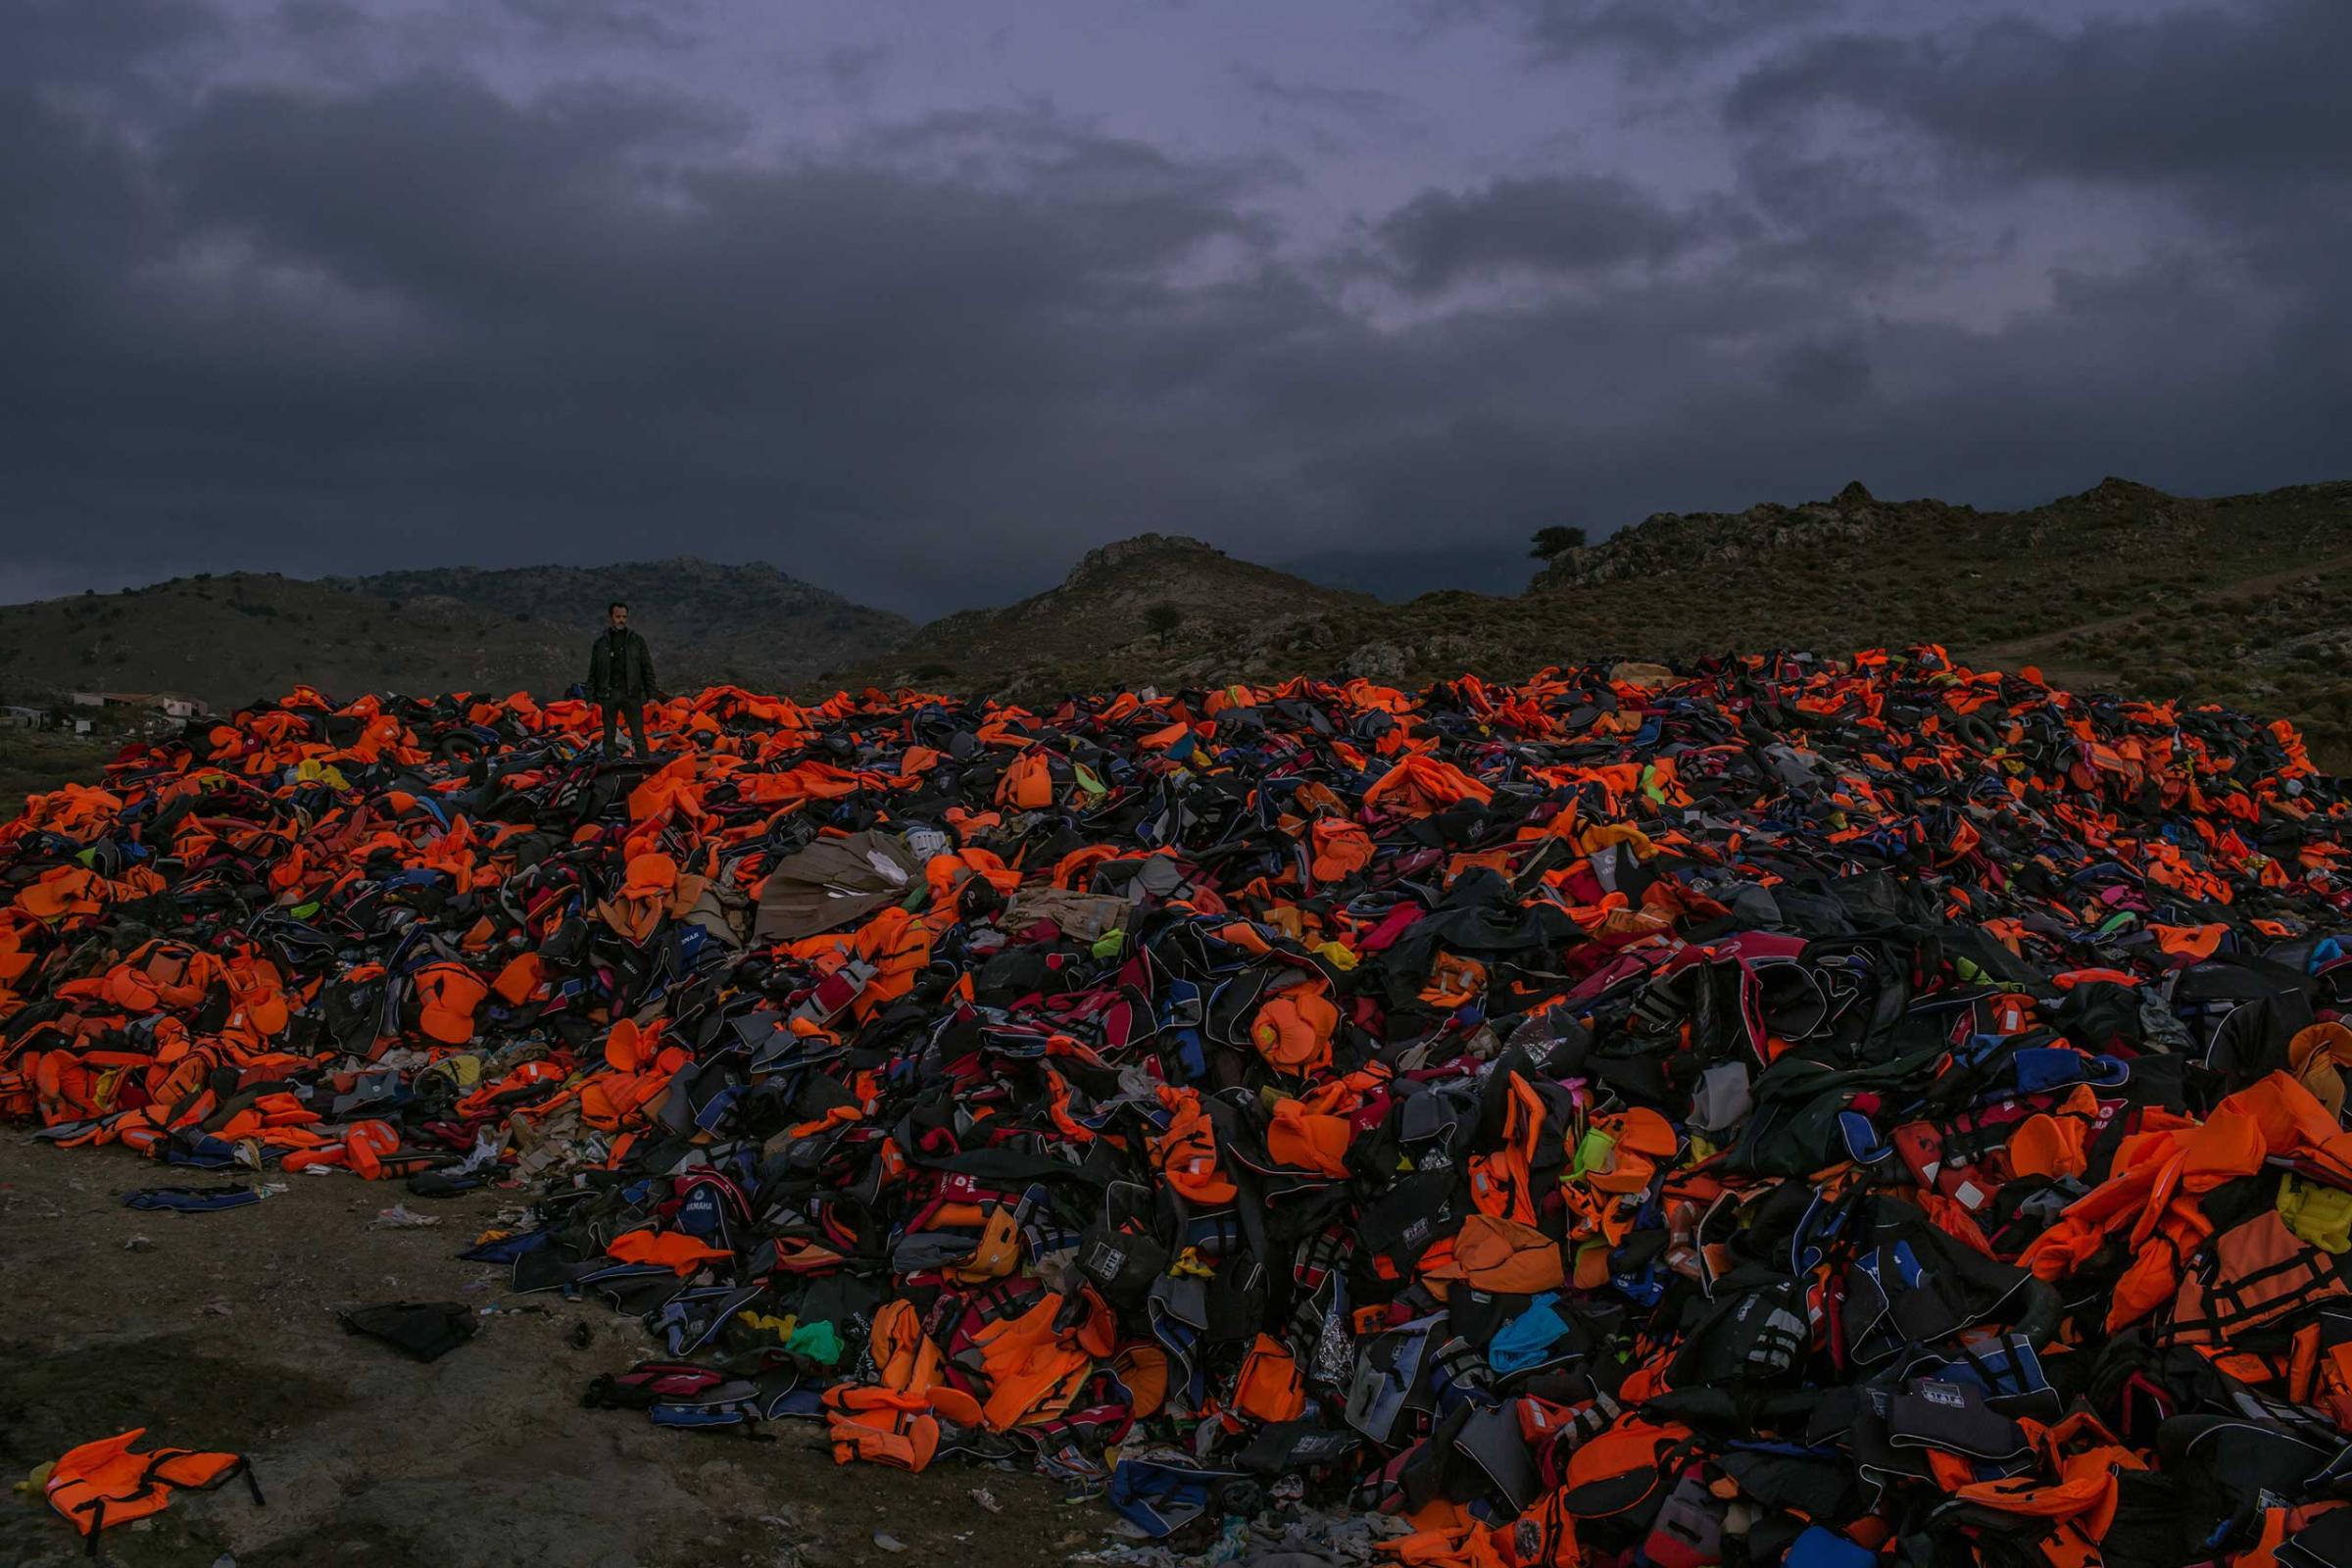 A huge pile of discarded life vests, inner tubes and deflated rubber dinghies, the basic equipment that thousands of refugees have using to cross the Aegean sea from Turkey, at dusk on the Greek island of Lesbos. Nov. 7, 2015.